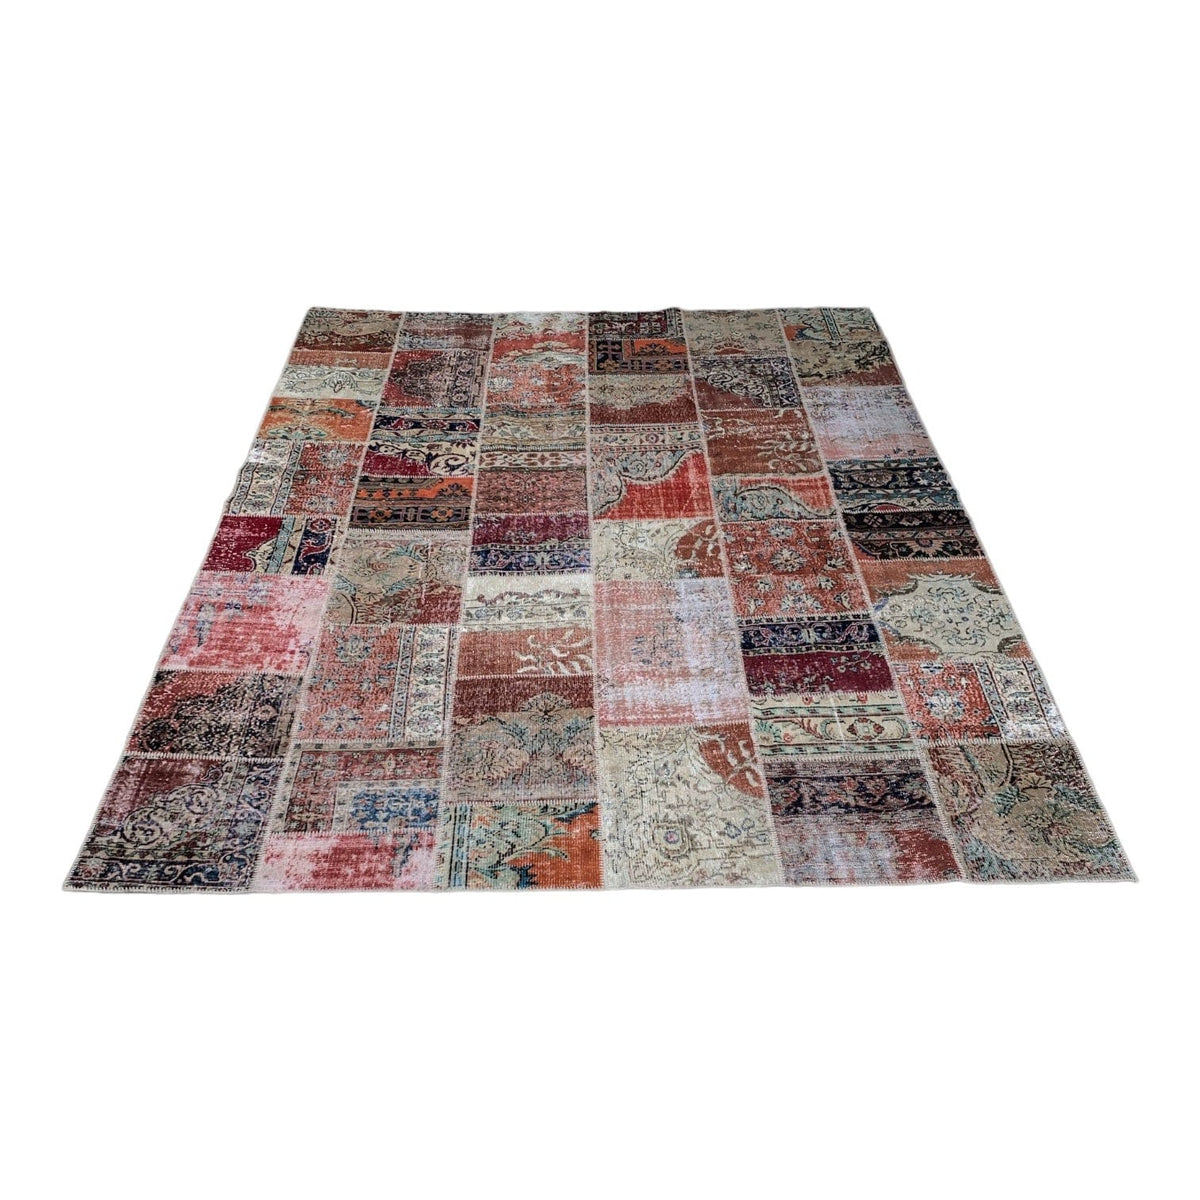 Rusty Red Patchwork 3x4m Rug Little & fox